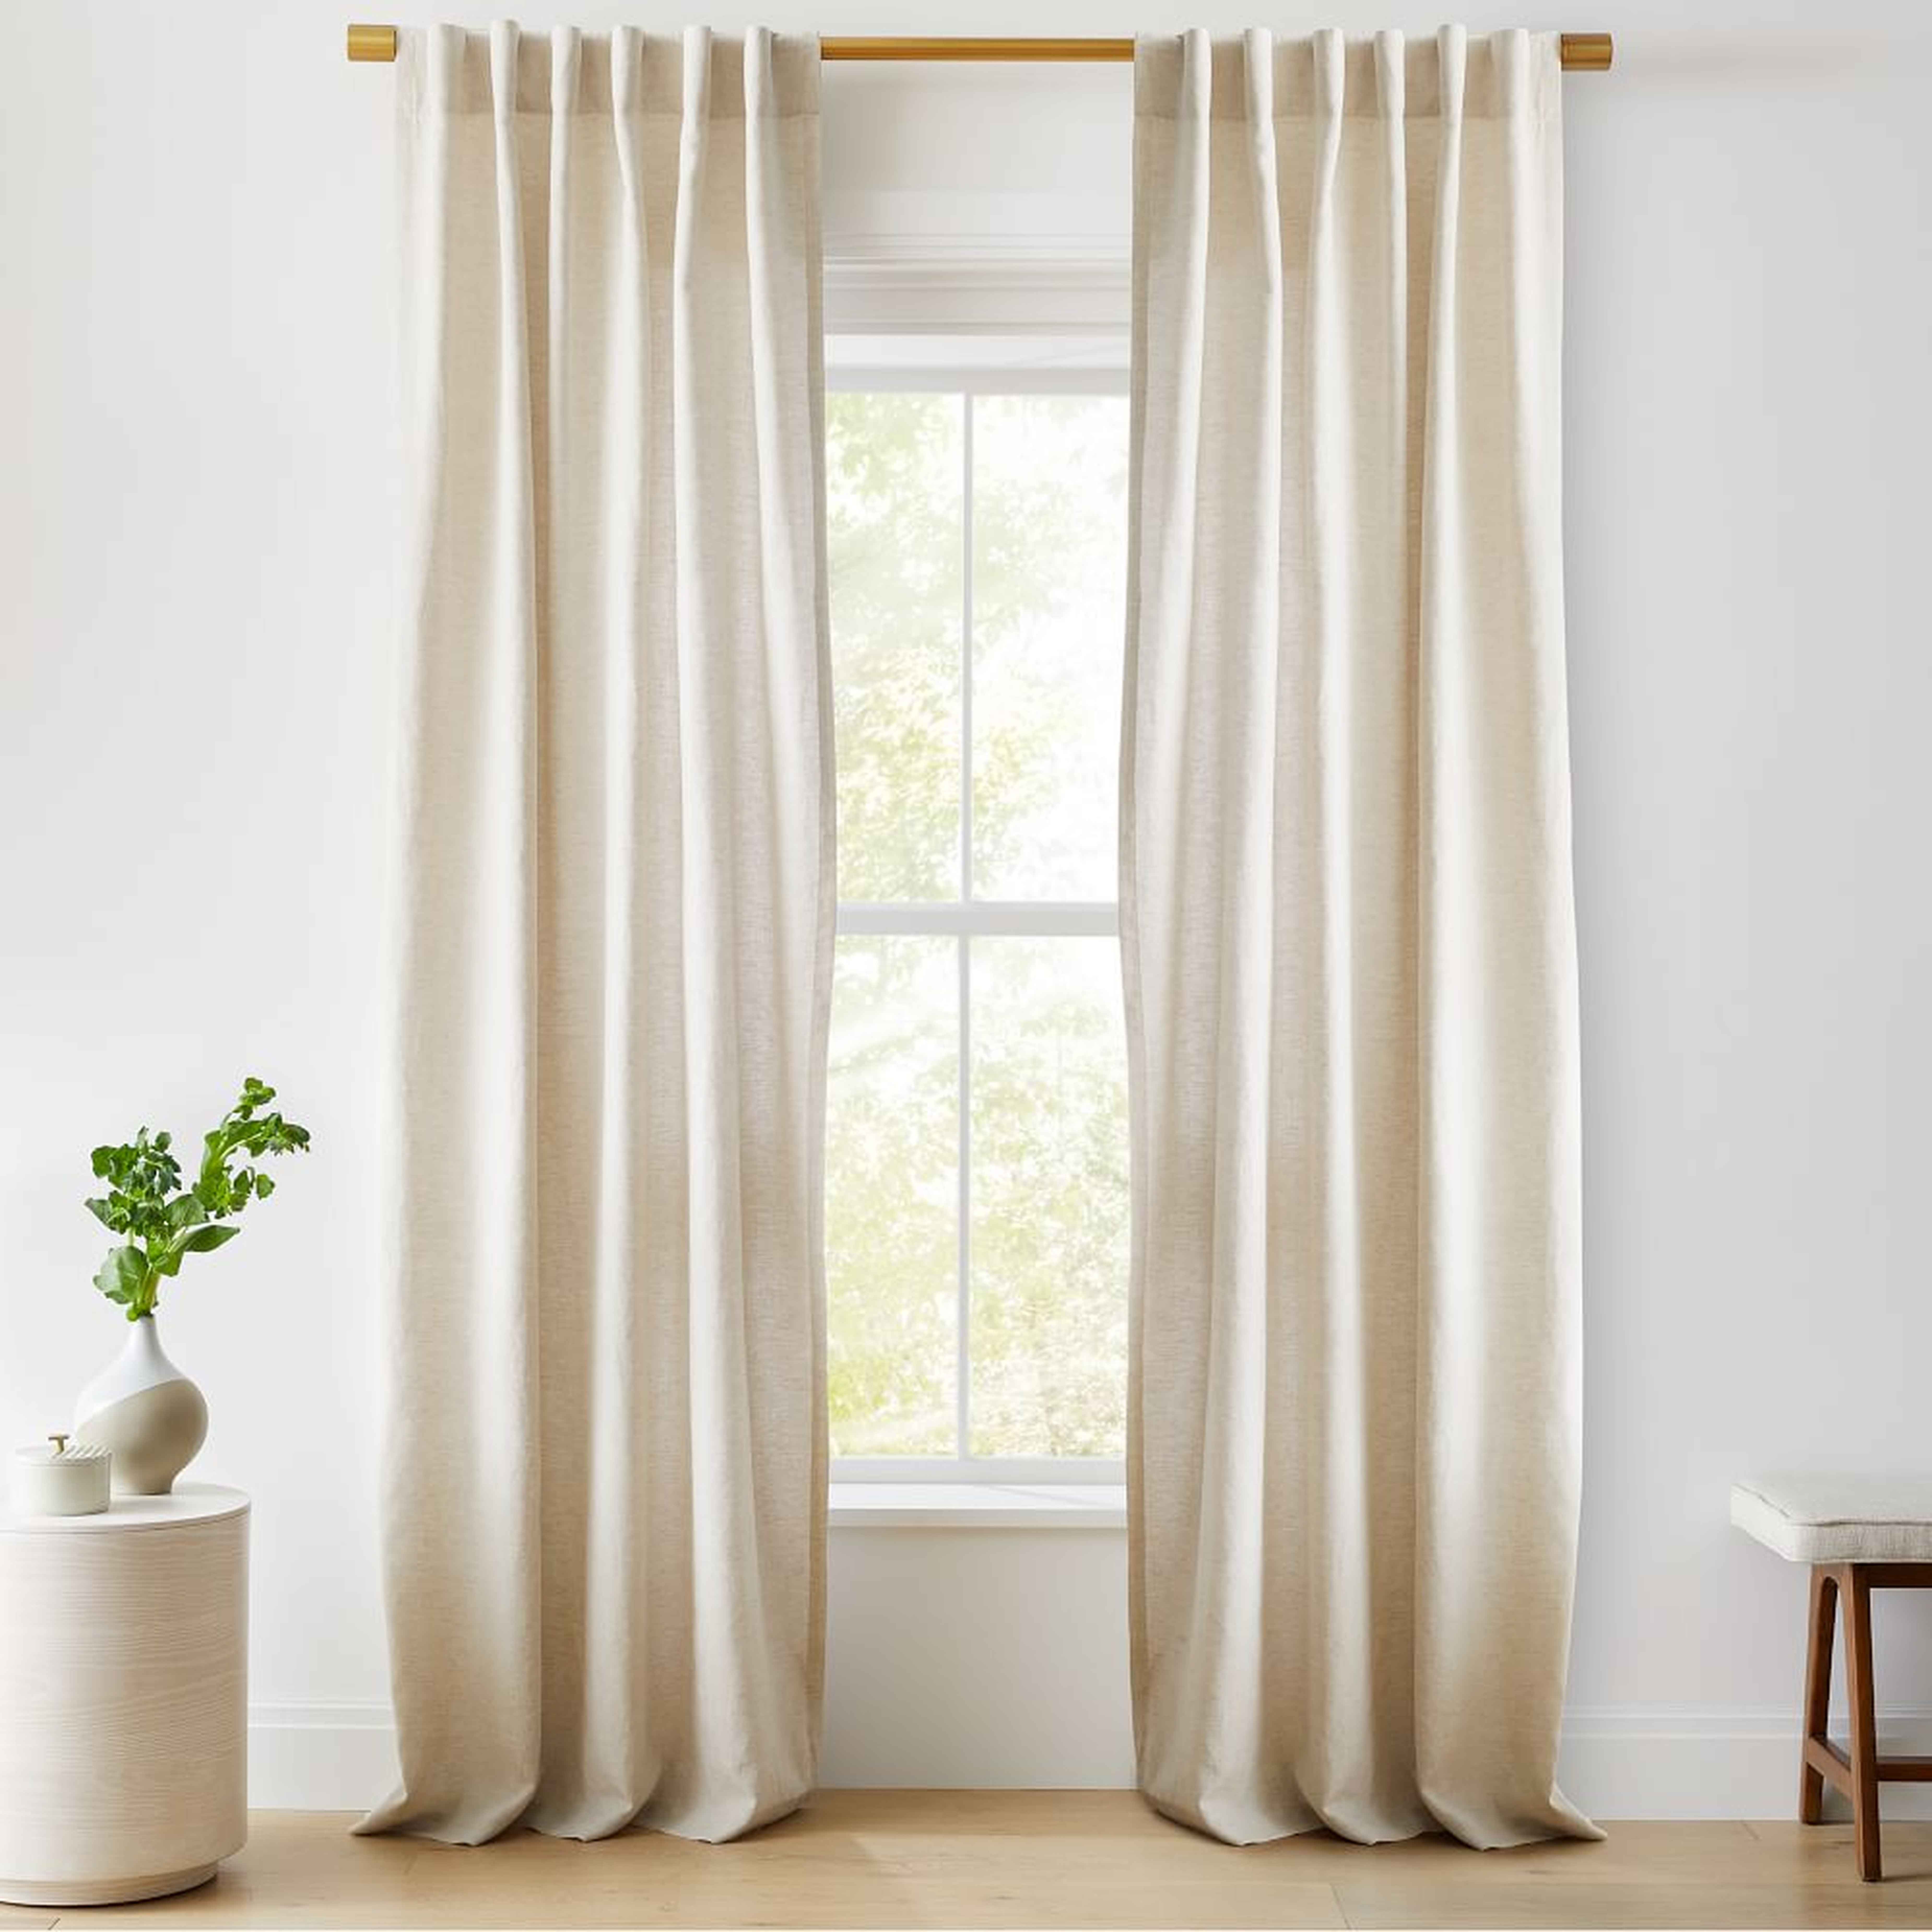 European Flax Linen Curtain with Blackout Lining, Natural, 48"x96" - West Elm